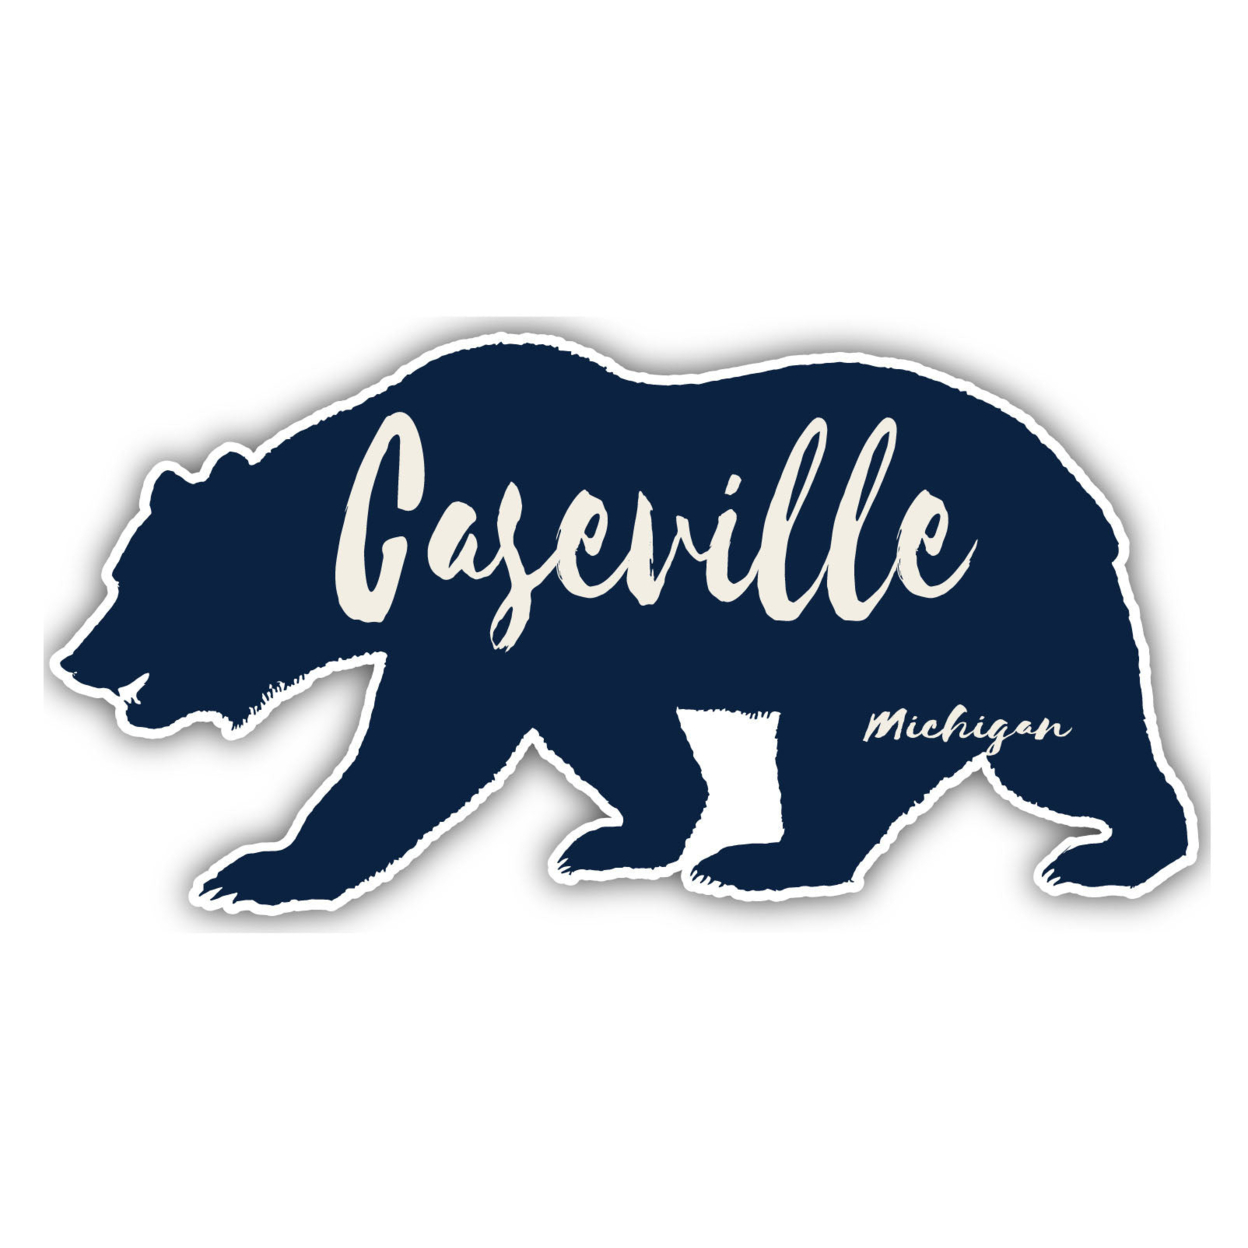 Caseville Michigan Souvenir Decorative Stickers (Choose Theme And Size) - 4-Pack, 10-Inch, Bear